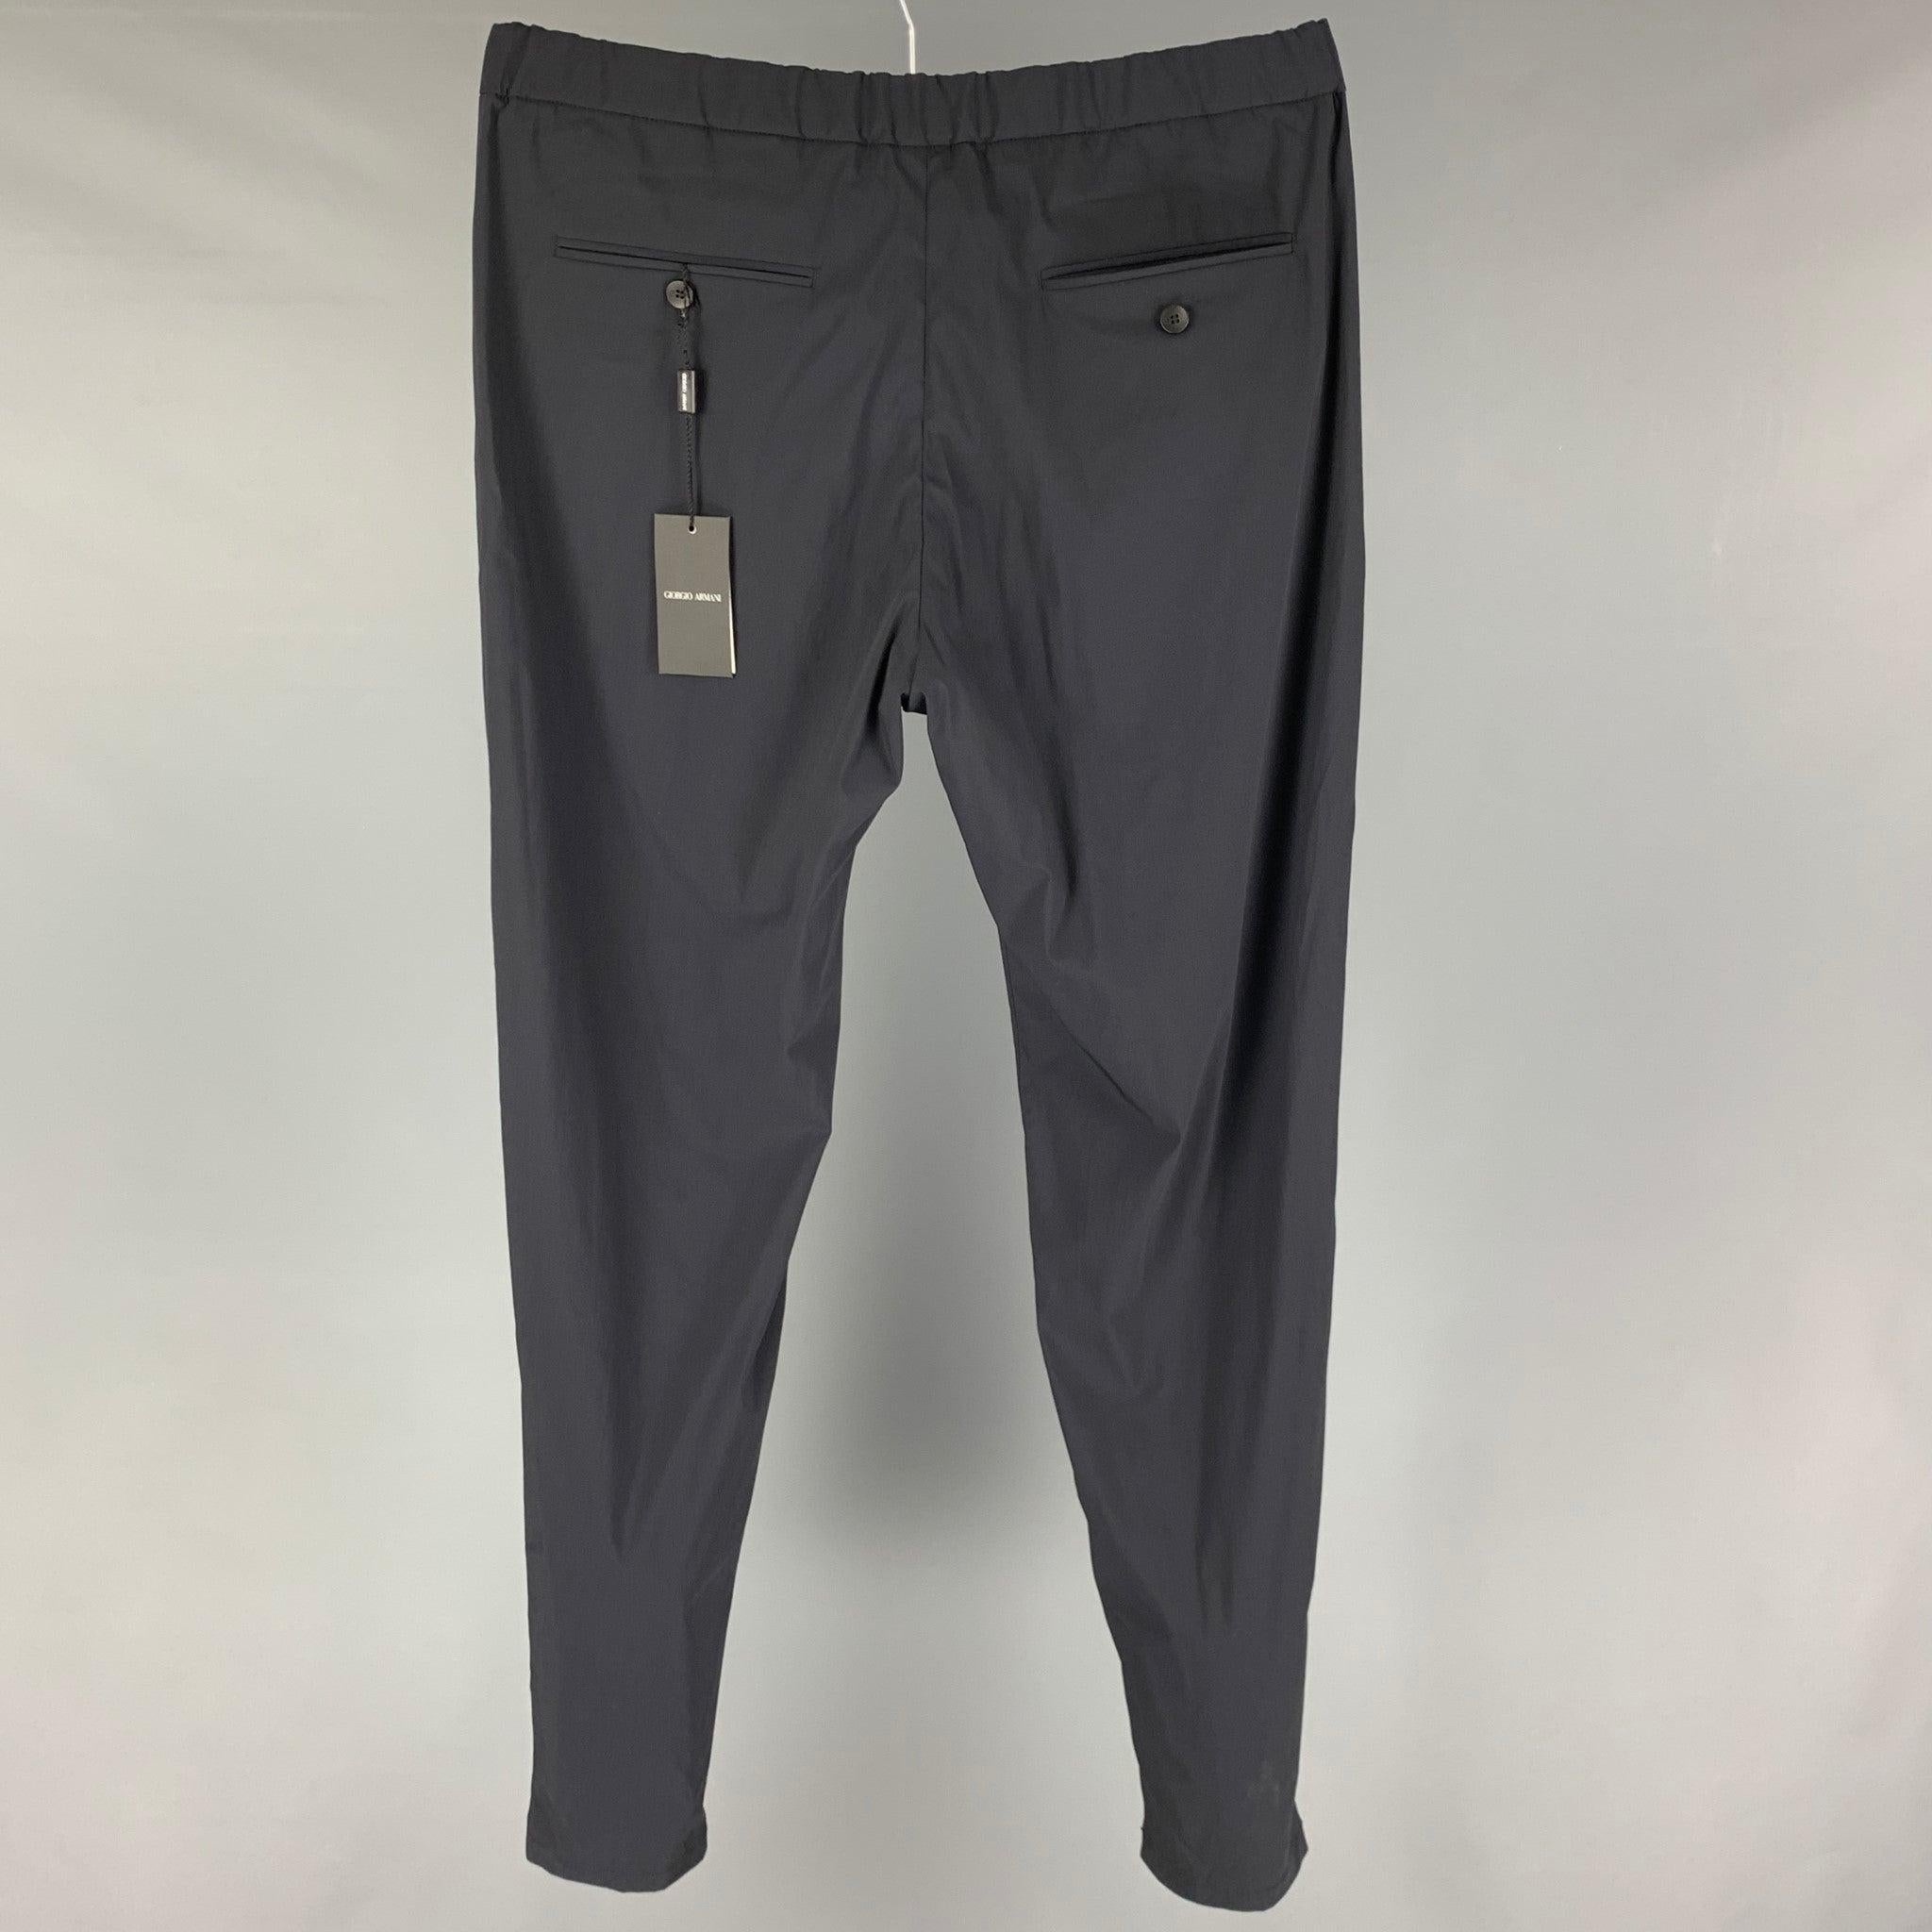 GIORGIO ARMANI dress pants comes in a navy wool blend featuring a slim fit, elastic waistband, front tab, and a zip fly closure. Made in Italy.
New with tags. 

Marked:   50 

Measurements: 
  Waist: 34 inches Rise: 11 inches Inseam: 36 inches Leg